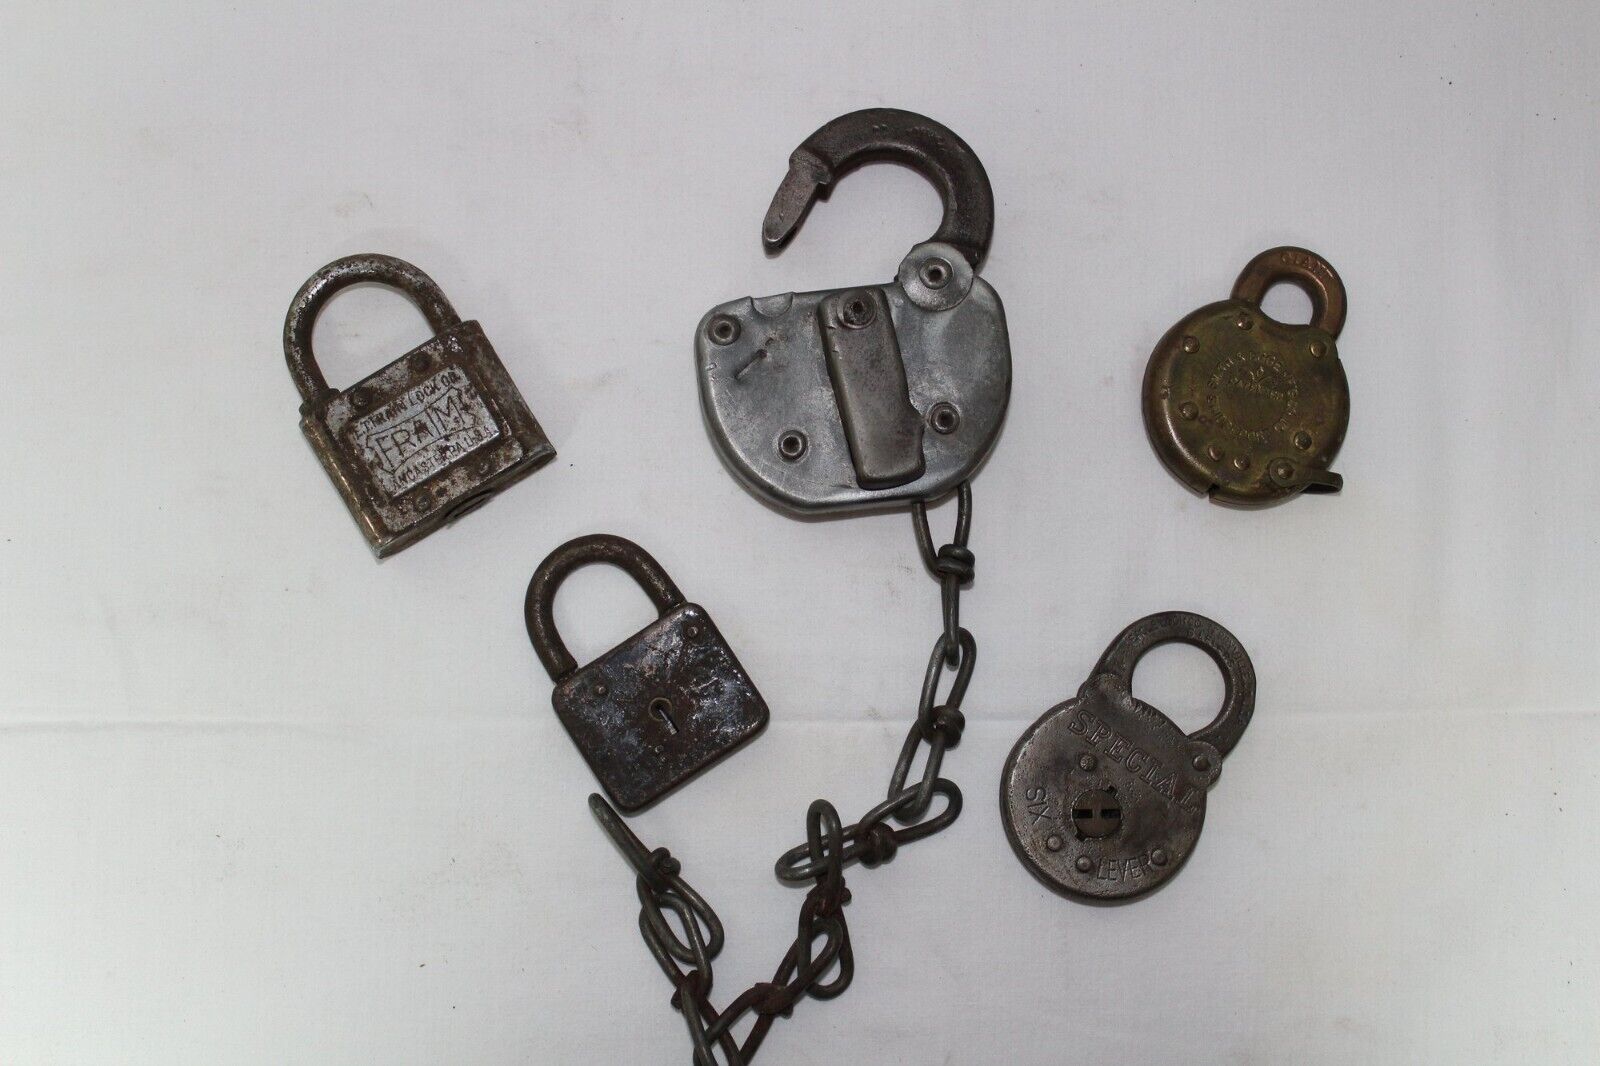 Mixed Antique Lock Collection Featuring Fraim, Special Eagle, Smith & Egg